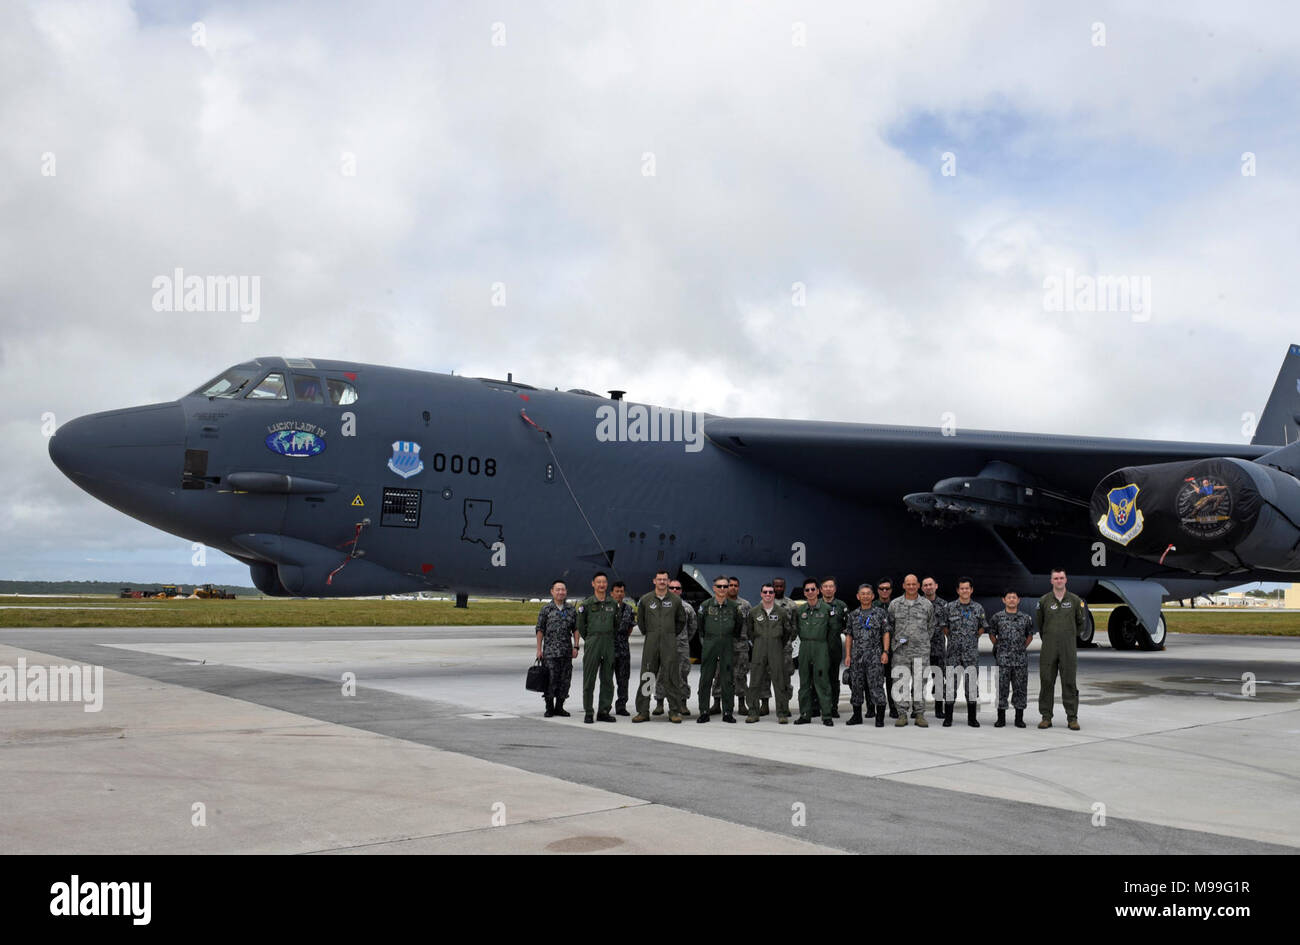 U.S. Air Force service members pose for a group photo in front of a B-52 Stratofortress with Koku Jieitai (Japan Air Self-Defense Force) leadership at Andersen Air Force Base, Guam, during exercise COPE NORTH 18 (CN18), Feb. 22.  CN18 is a model opportunity to practice humanitarian assistance/disaster relief in order to increase interoperability and readiness between the United States Air Force, Koku Jieitai (Japan Air Self-Defense Force) and Royal Australian Air Force. (U.S. Air Force photo/Airman 1st Class Gerald R. Willis) Stock Photo